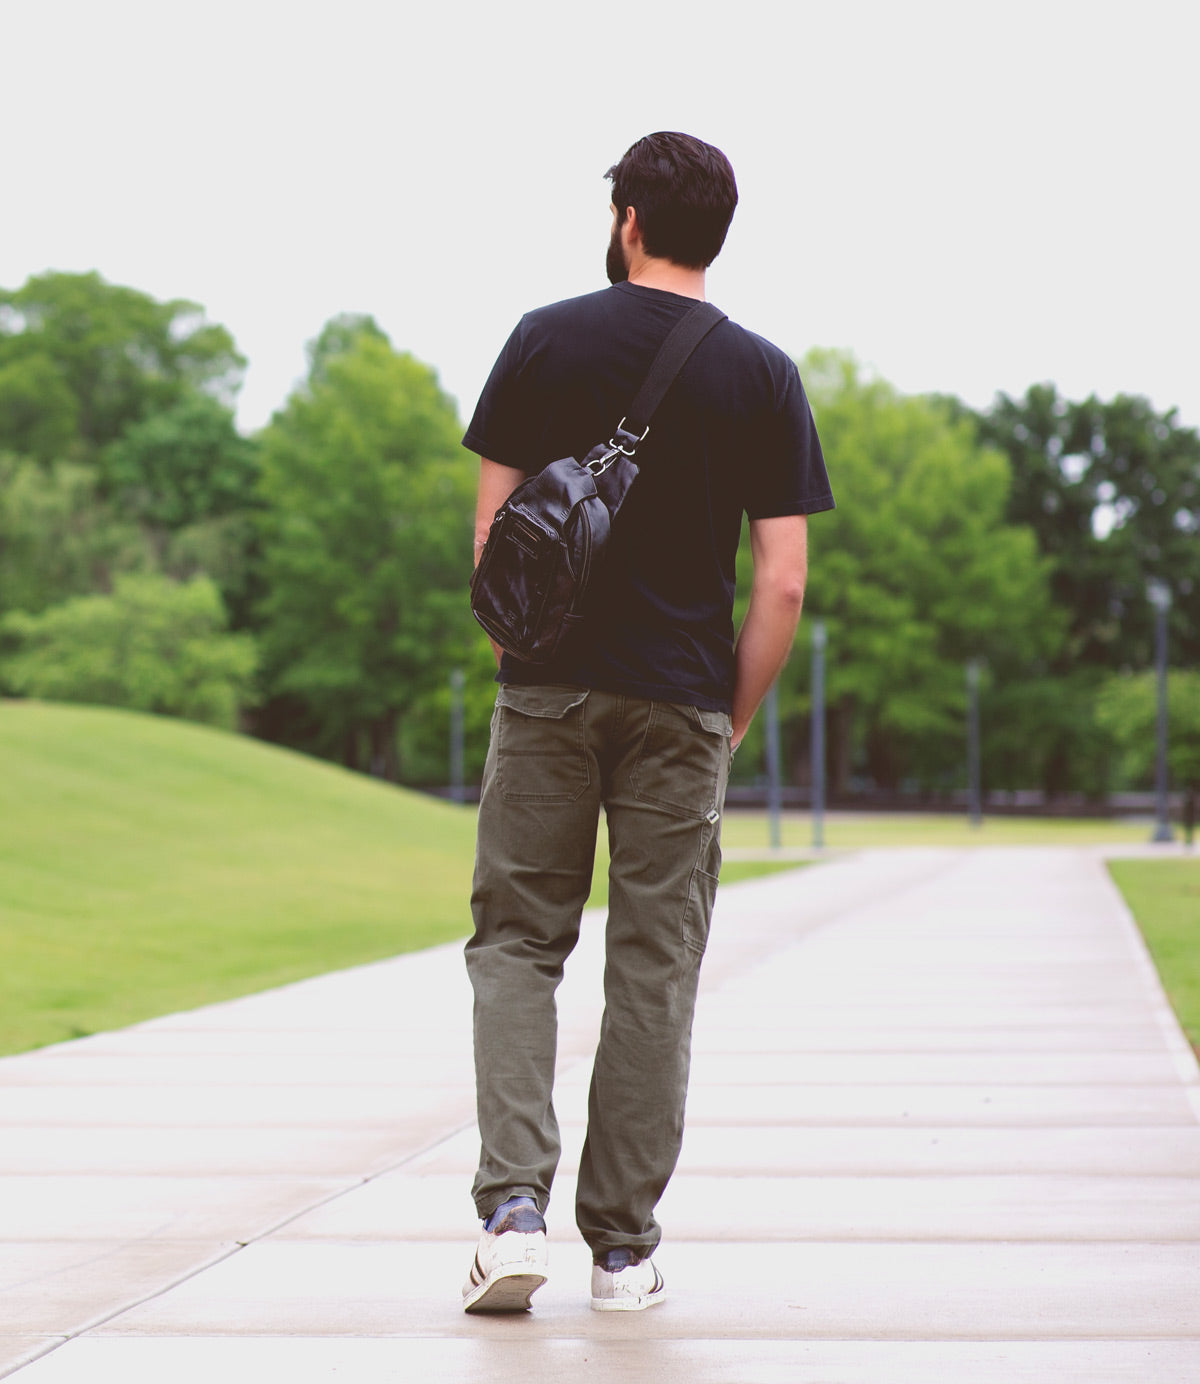 A man with a beard walks along a paved path in a park, wearing a black shirt, khaki pants, white sneakers, and carrying the Bed Stu Beau leather sling backpack with a durable strap. Green trees and grass line the background.